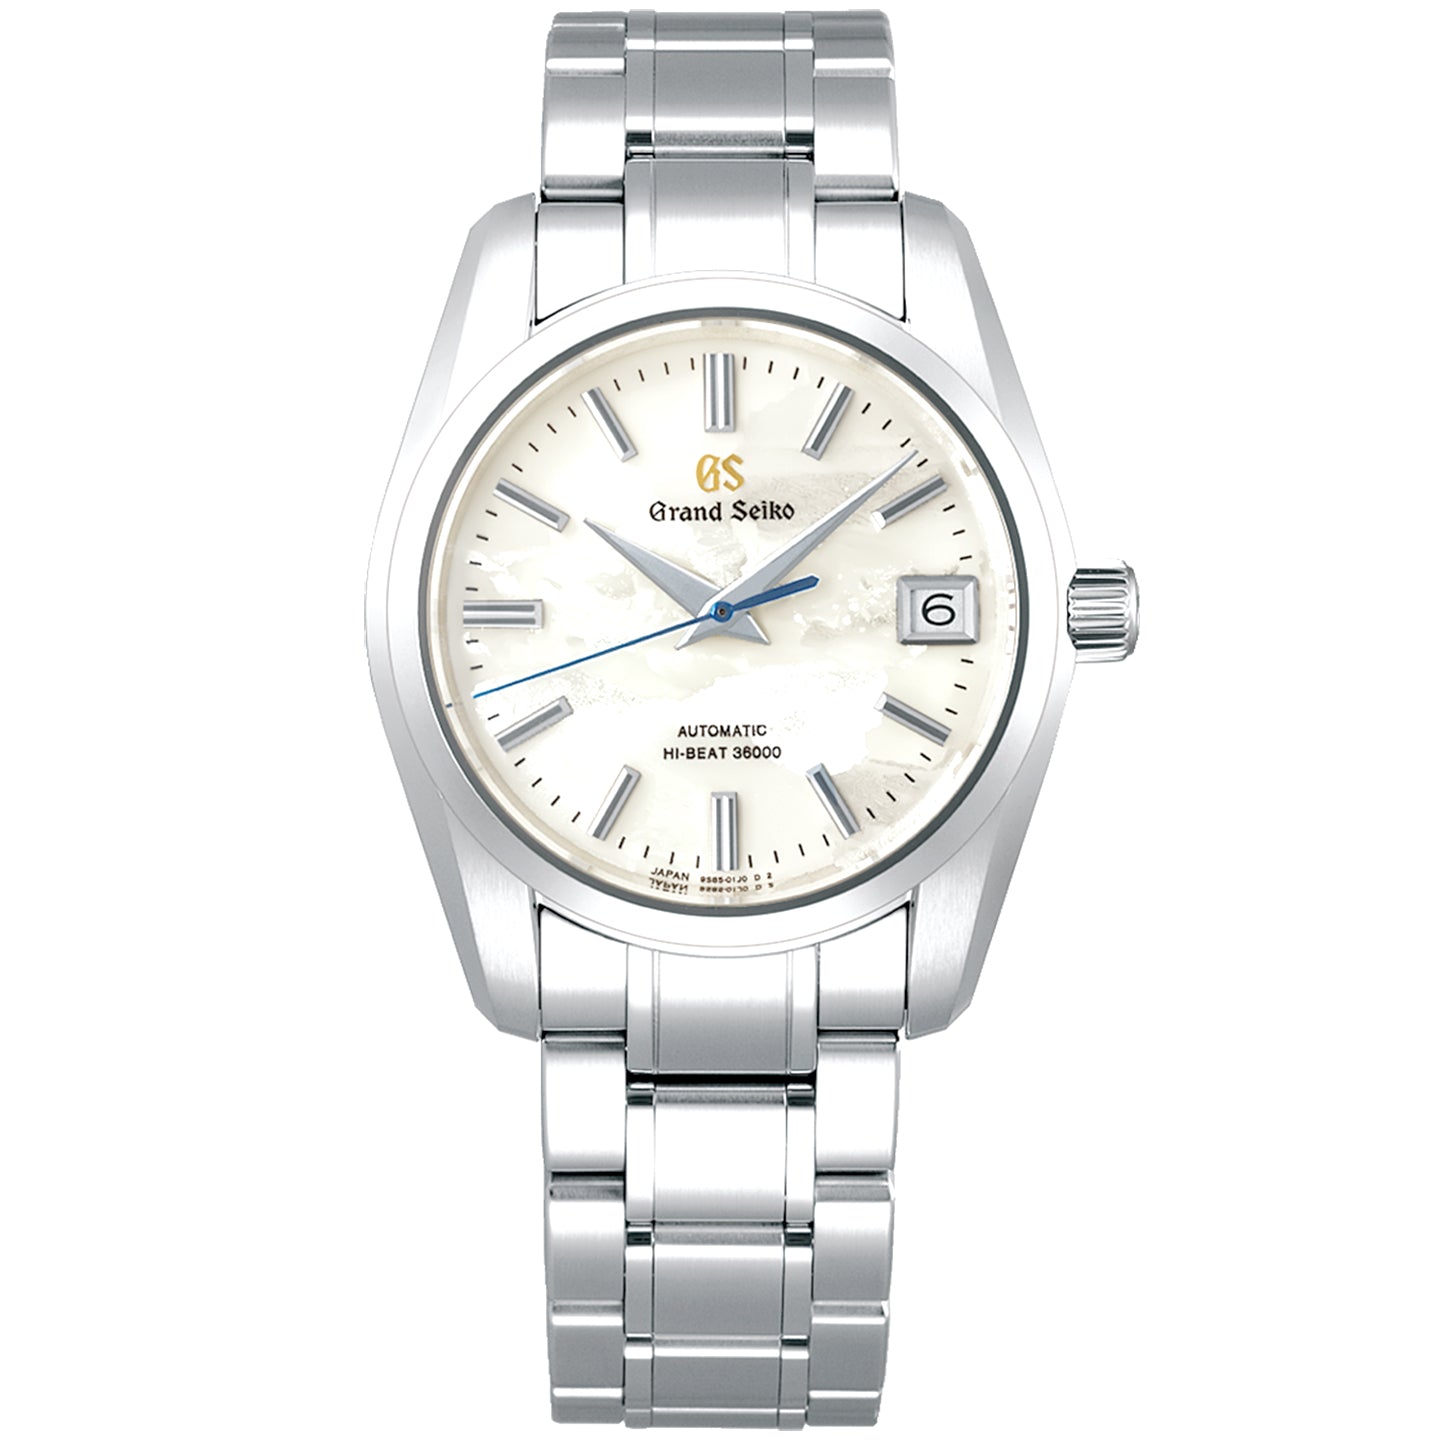 Heritage 37mm 'Unkai' Sea of Clouds Limited Edition Watch